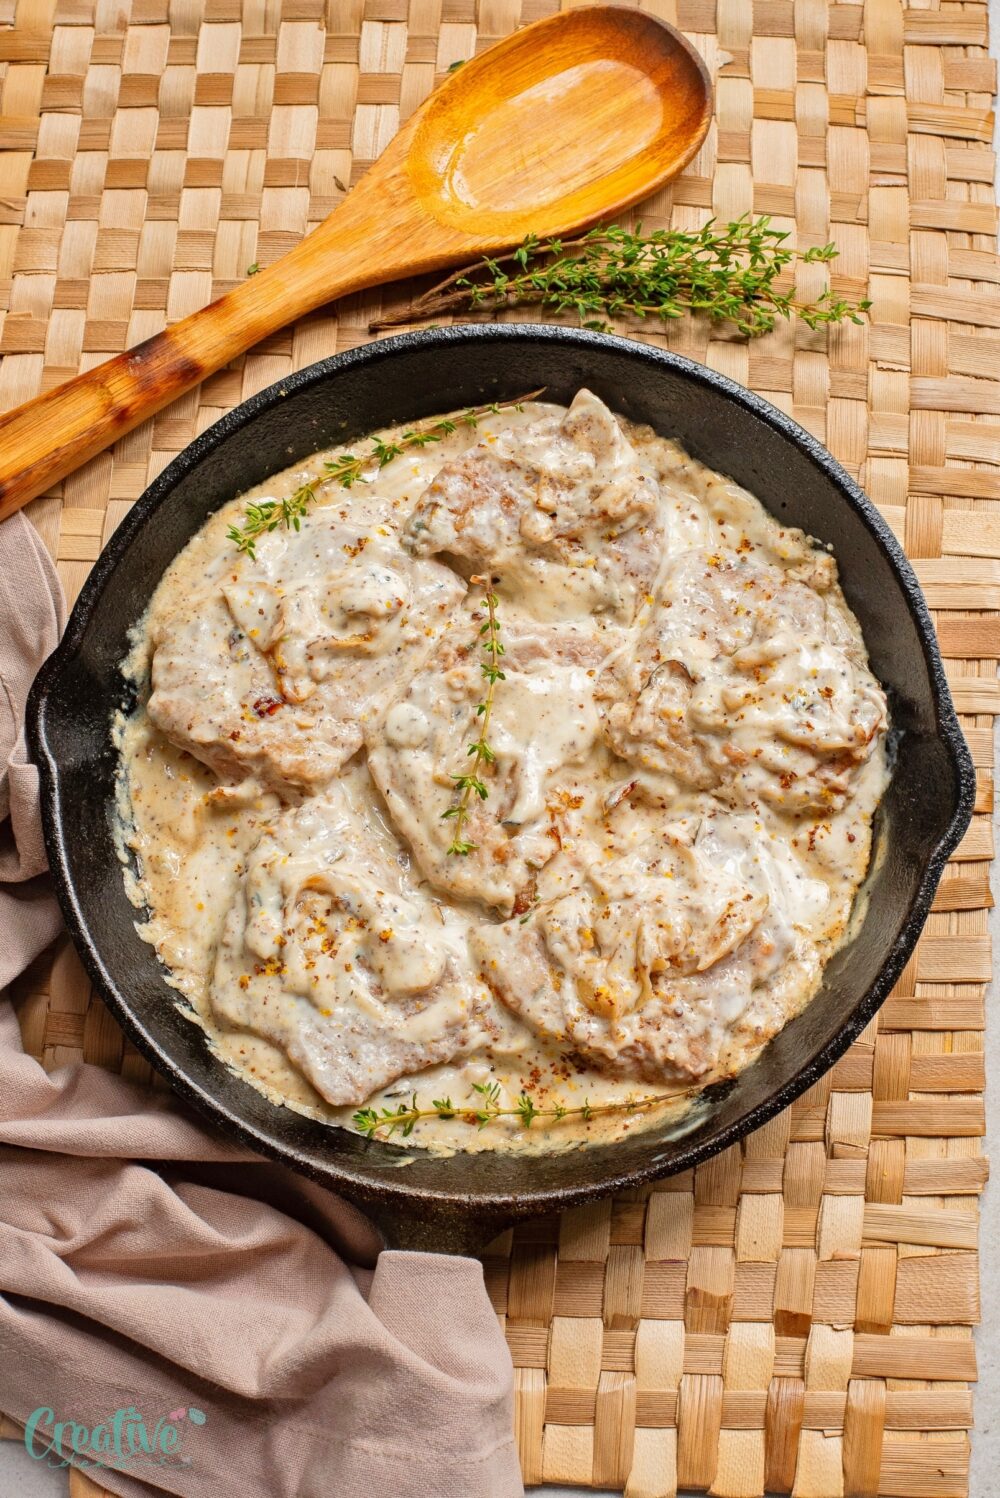 Juicy pork in tangy mustard sauce - a scrumptious meal that will delight your taste buds in no time!